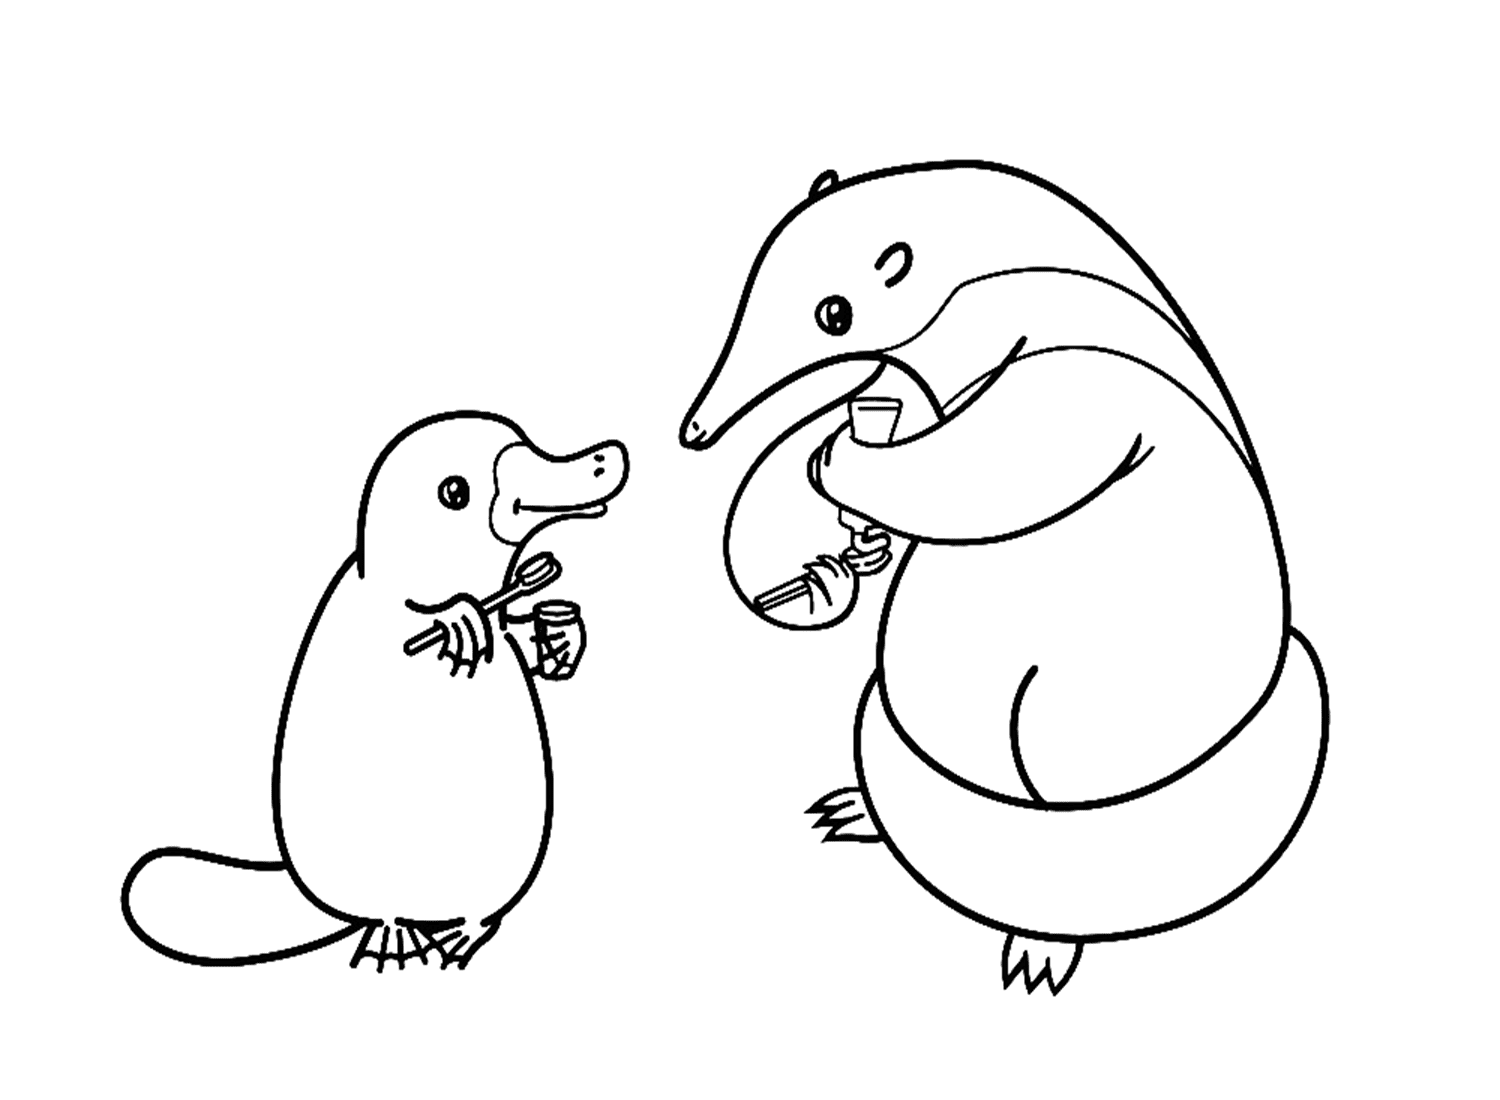 Ant Eater And Platypus from Platypus